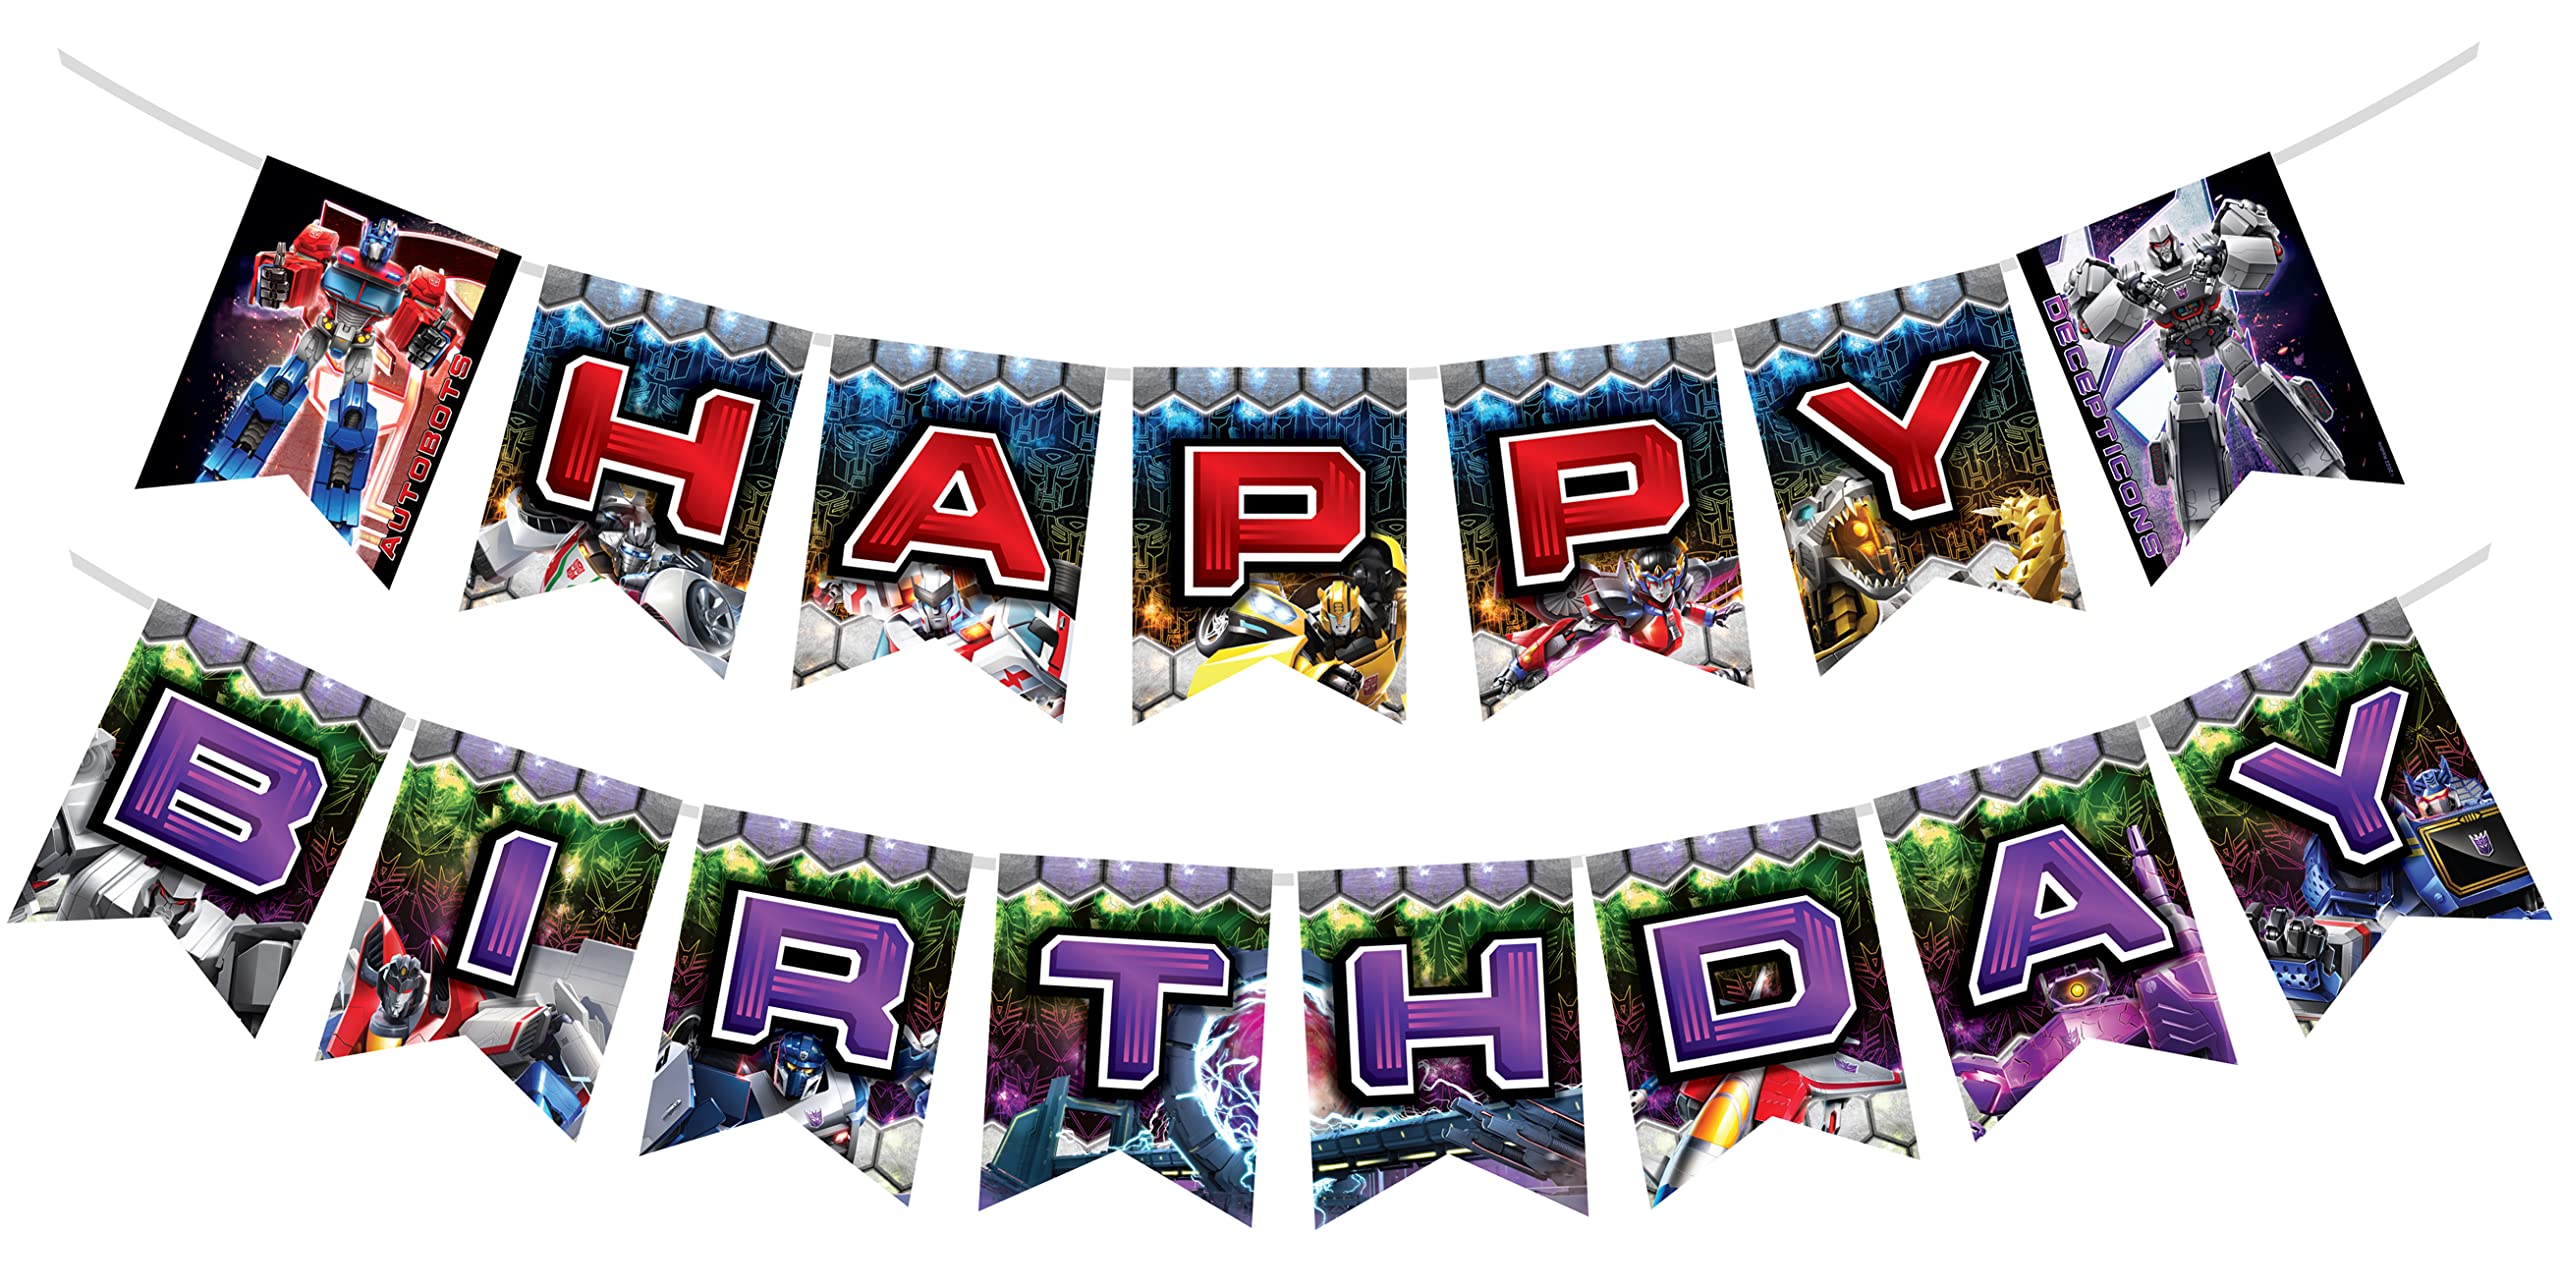 Treasures Gifted Officially Licensed Transformers Birthday Banner - Transformers Party Supplies - Transformers Happy Birthday Banner - Transformers Birthday Party Supplies - Transformers Banner